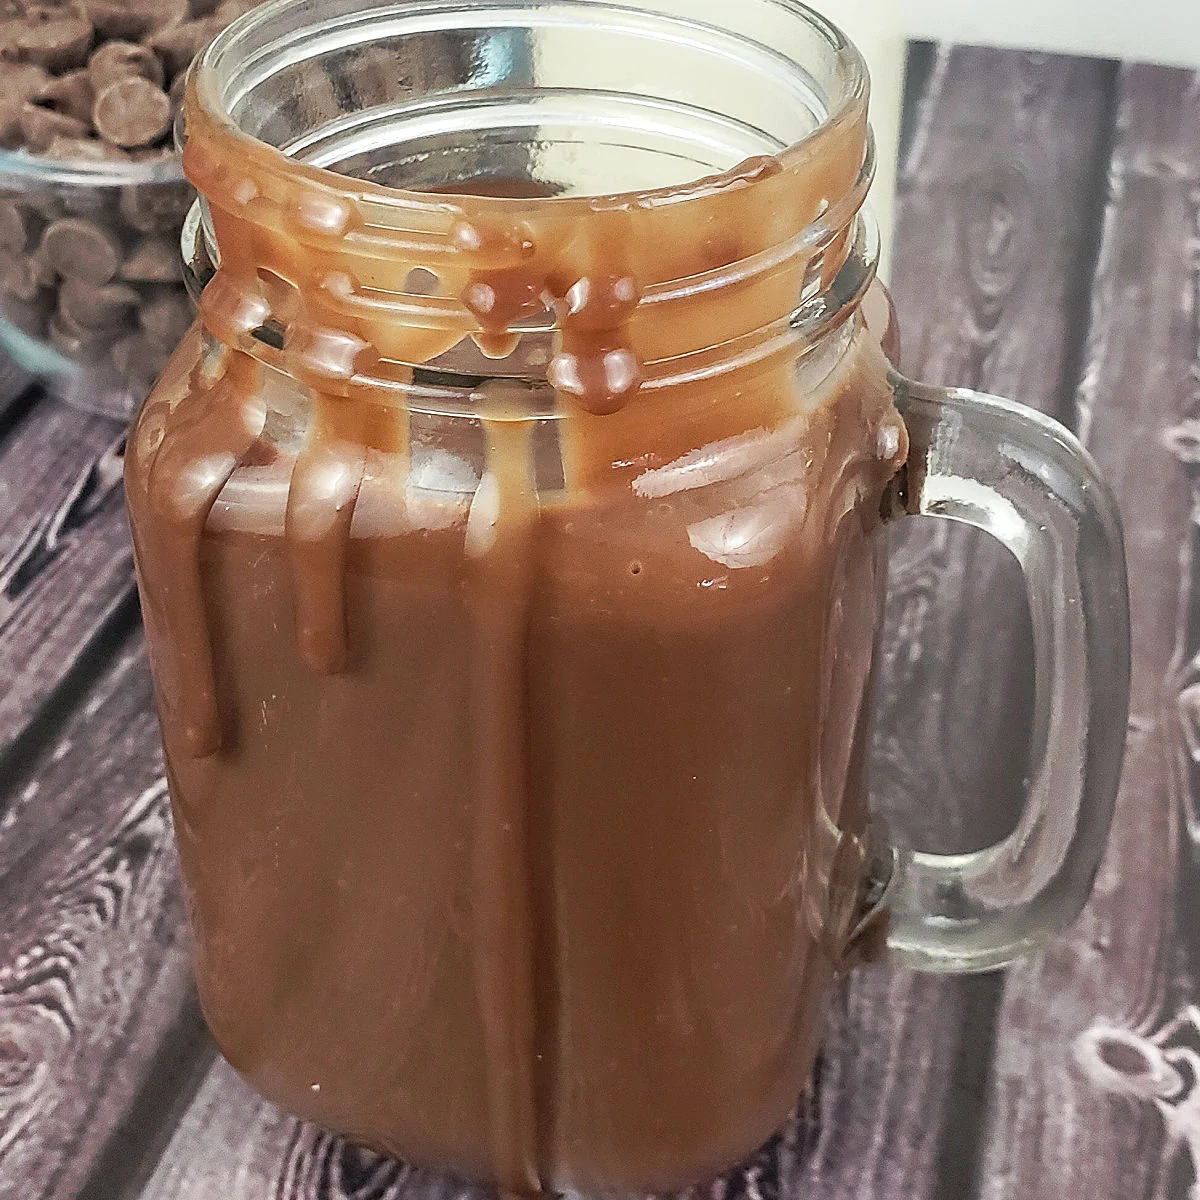 Chocolate sauce in pint jar, dripping down the sides.